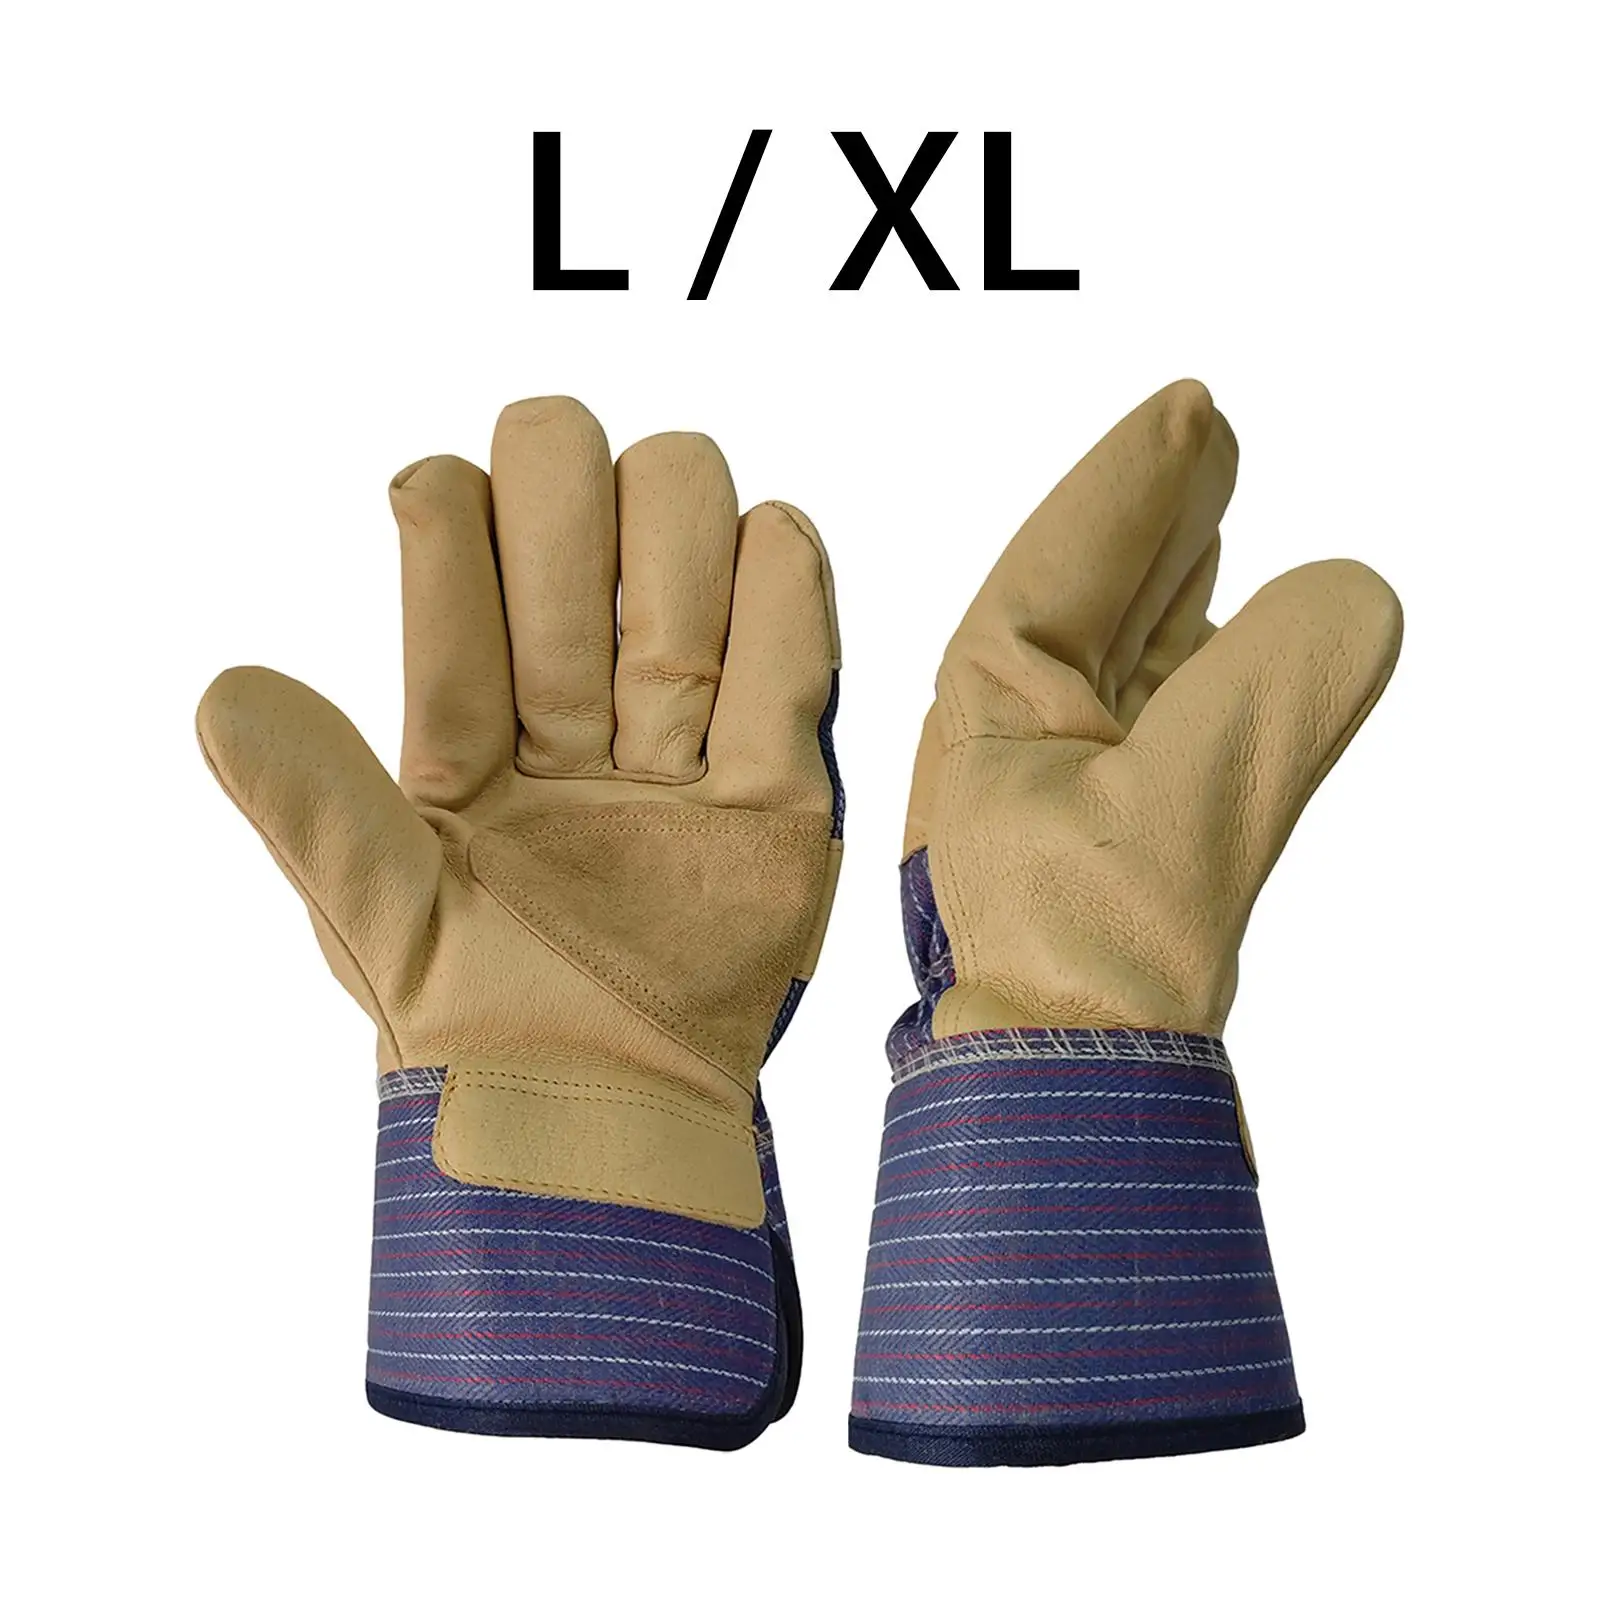 Welding Gloves with Reinforced Palm Animal Handling Glove Welding Accessories Protection Gloves for Grill Warehouse Stove Baking